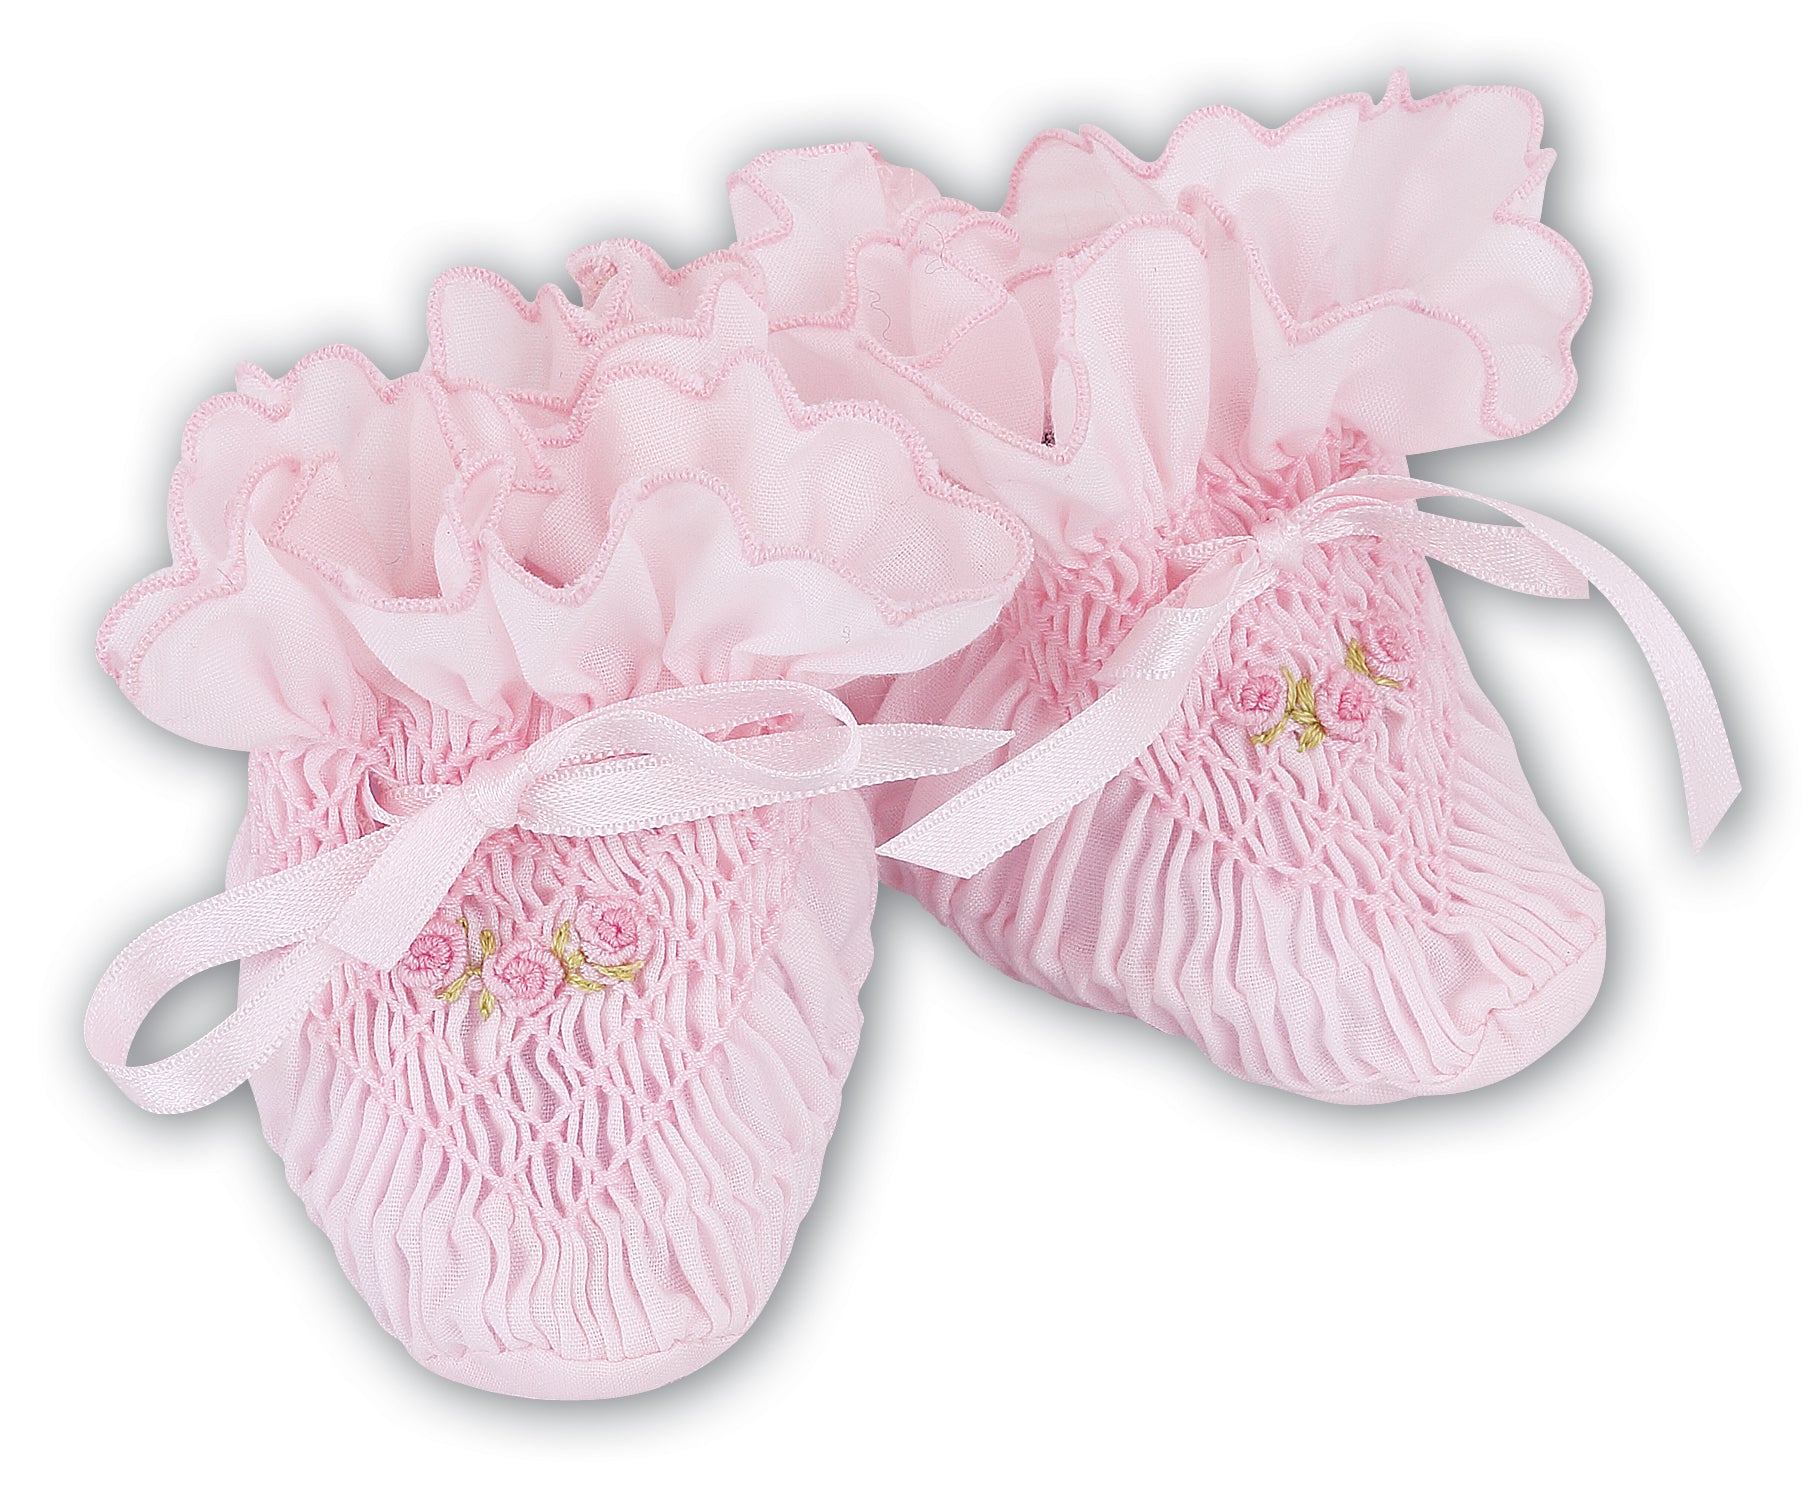 sarah louise baby shoes